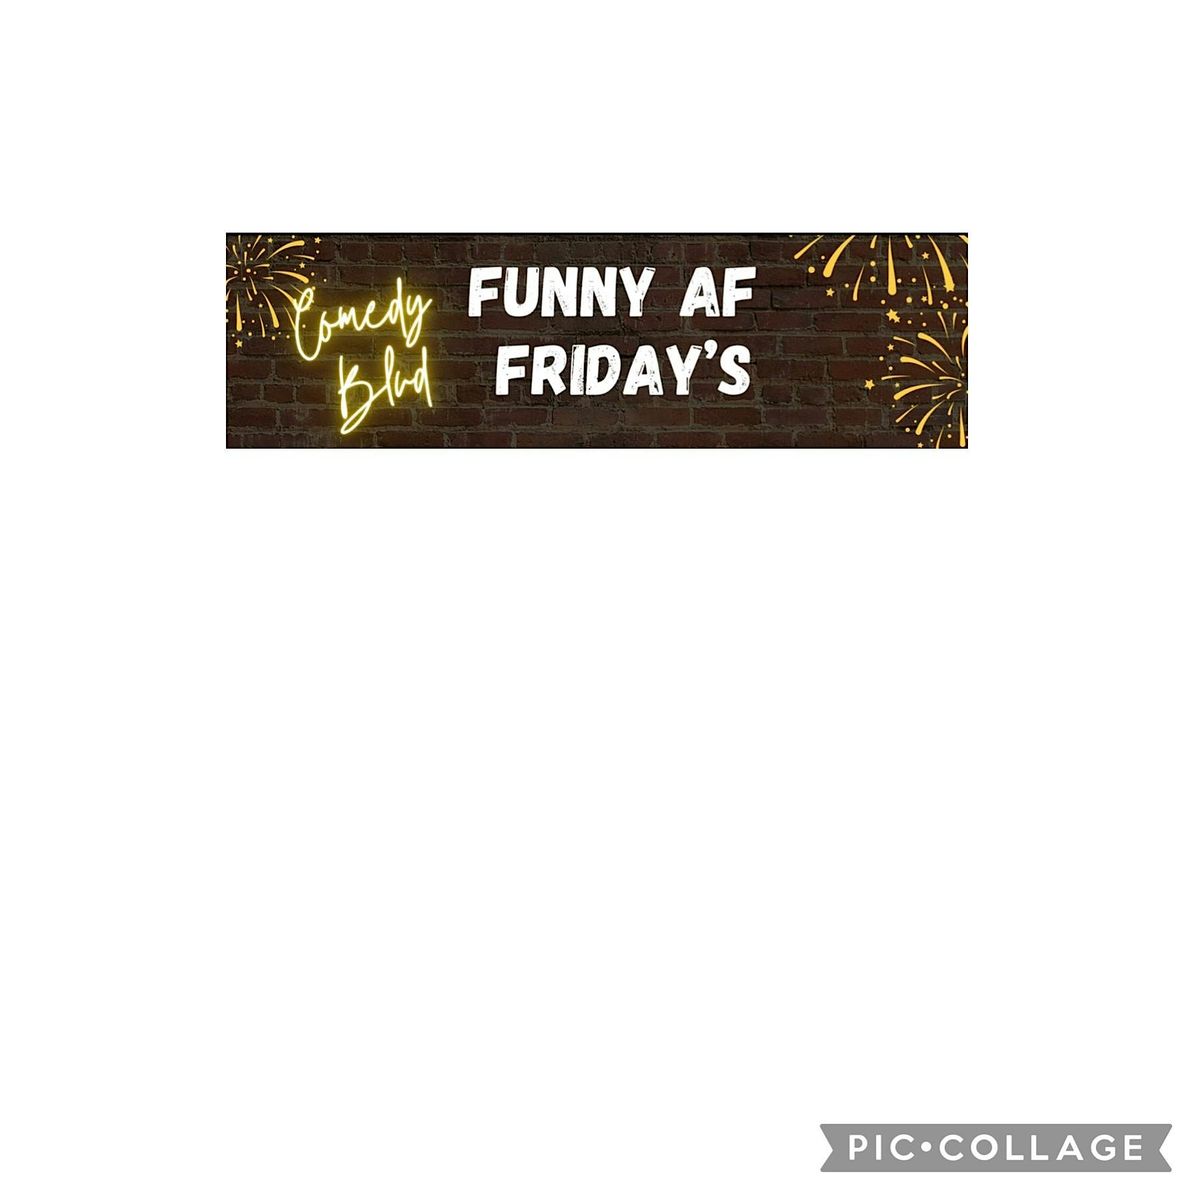 Friday, July 19th, 8:30 PM - Funny AF Friday's!!! Comedy Blvd